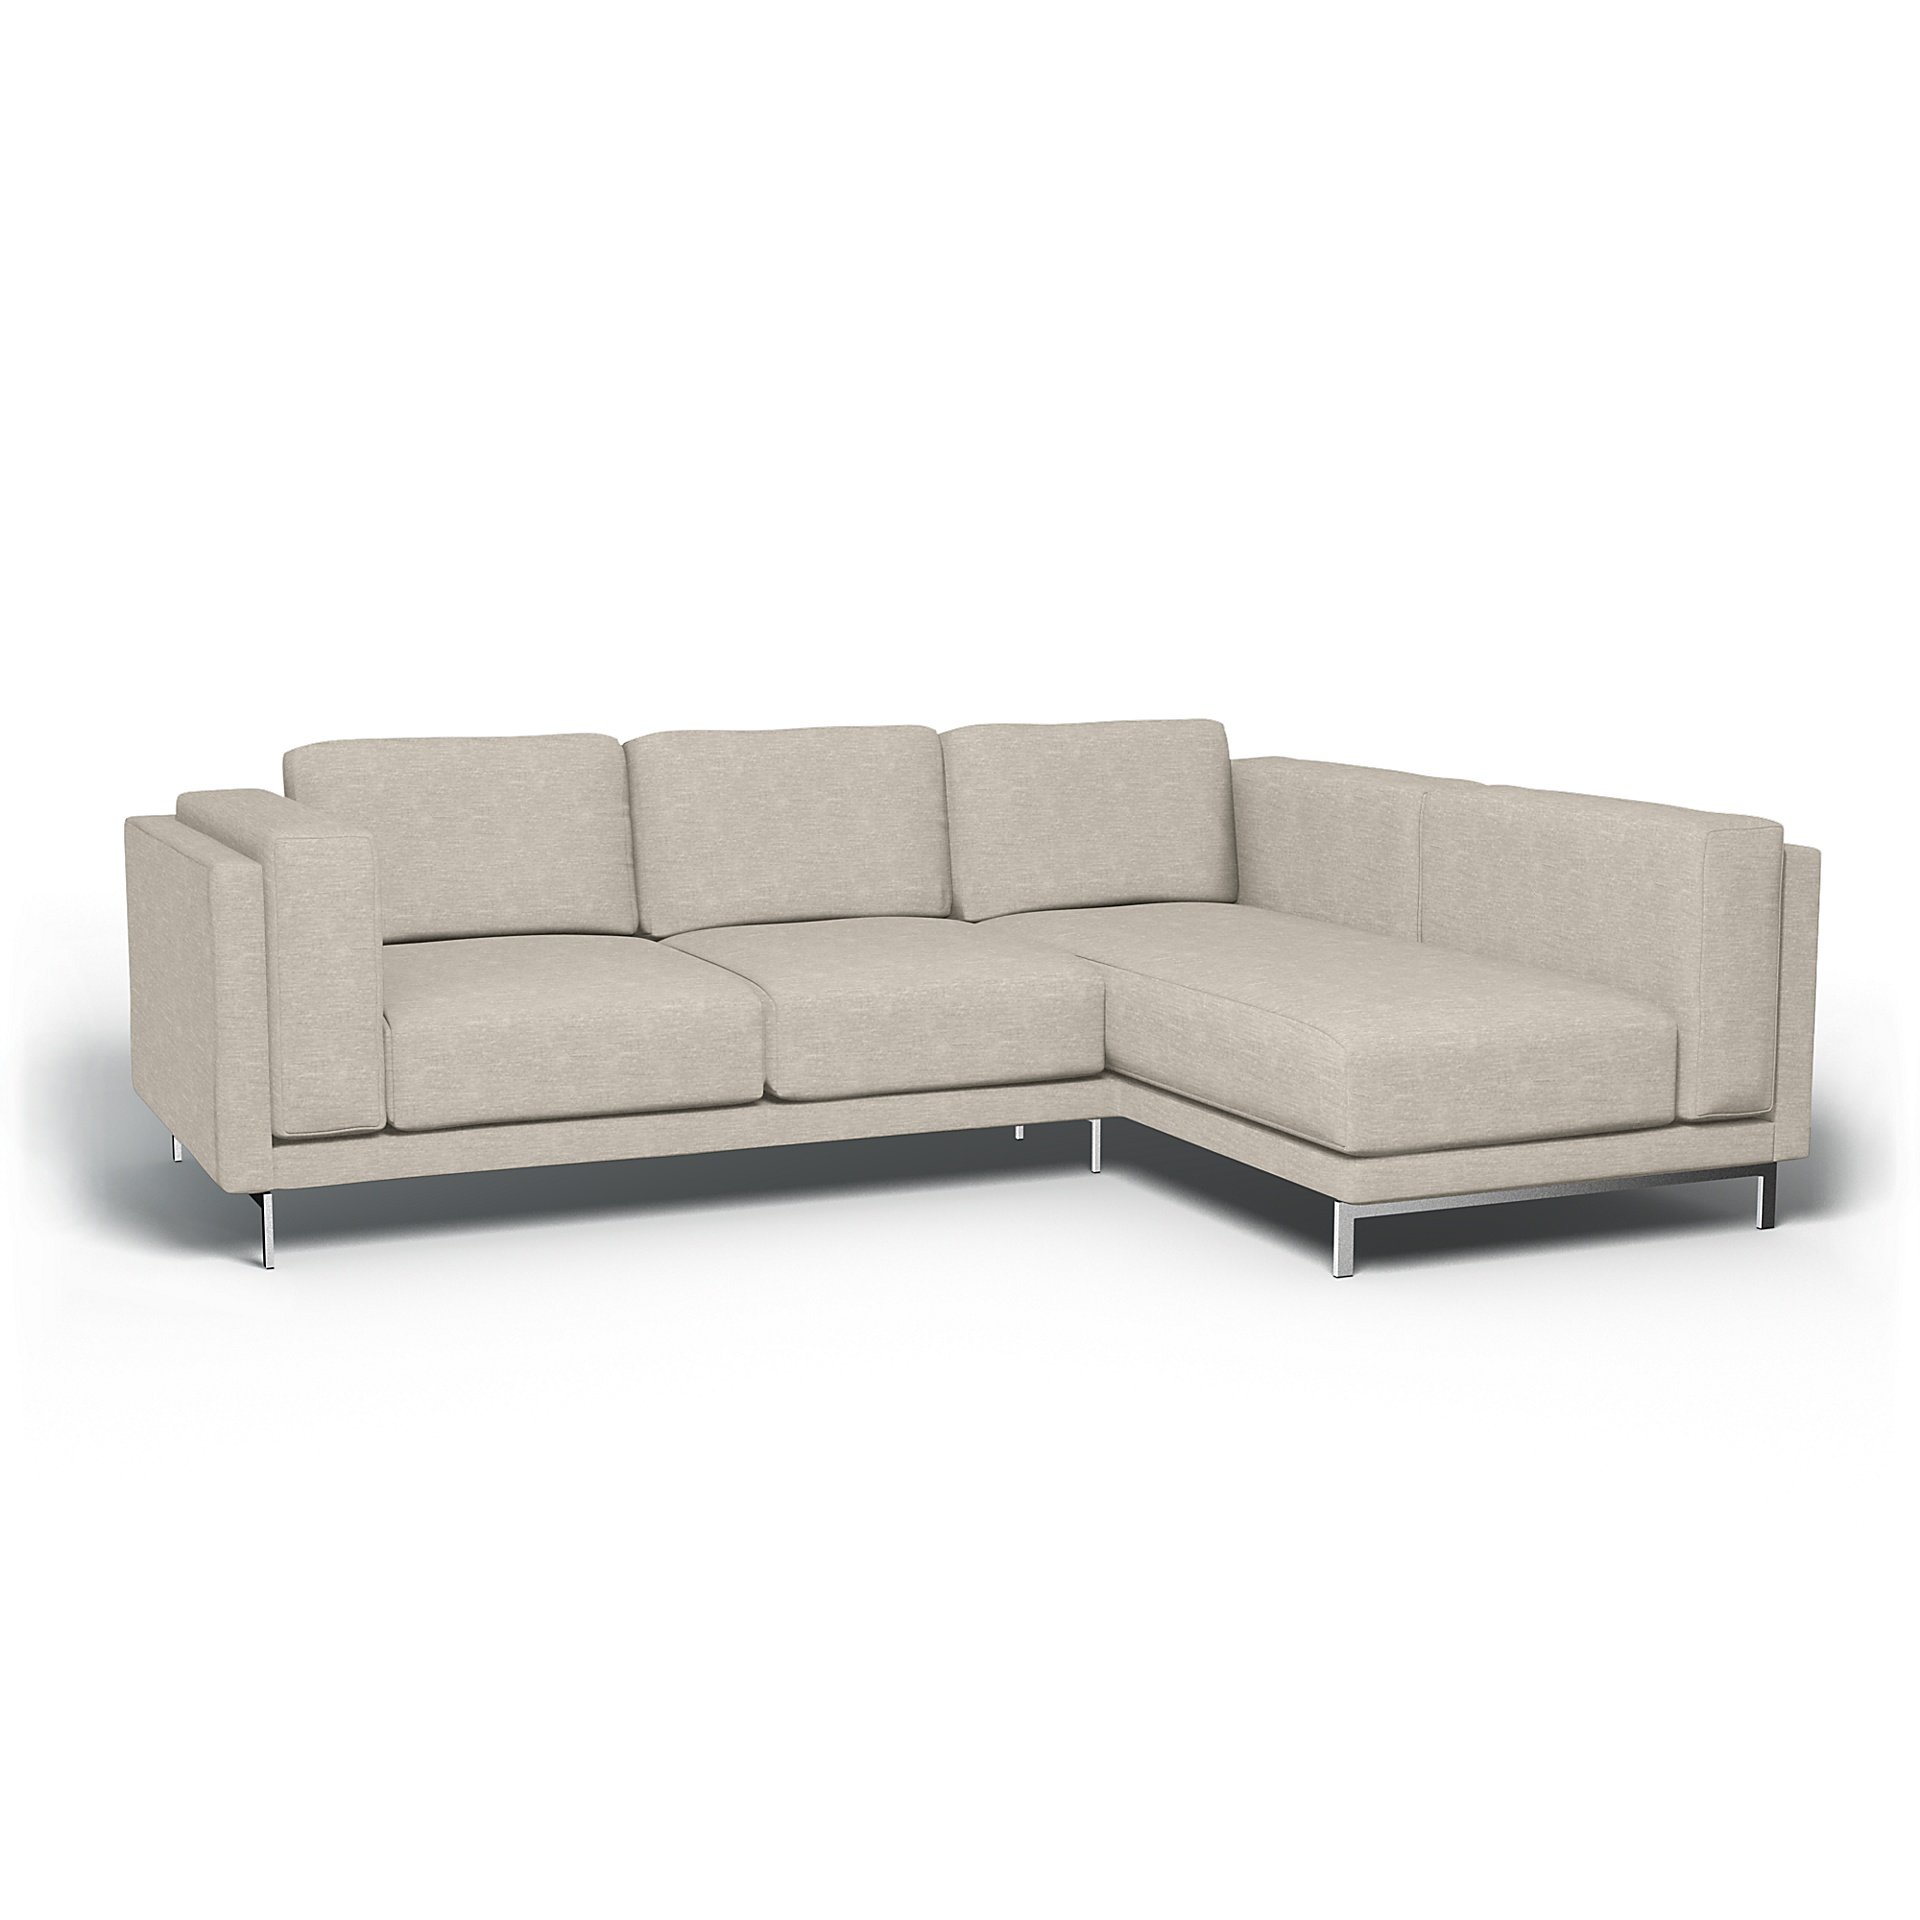 IKEA - Nockeby 3 Seat Sofa with Right Chaise Cover, Natural White, Velvet - Bemz